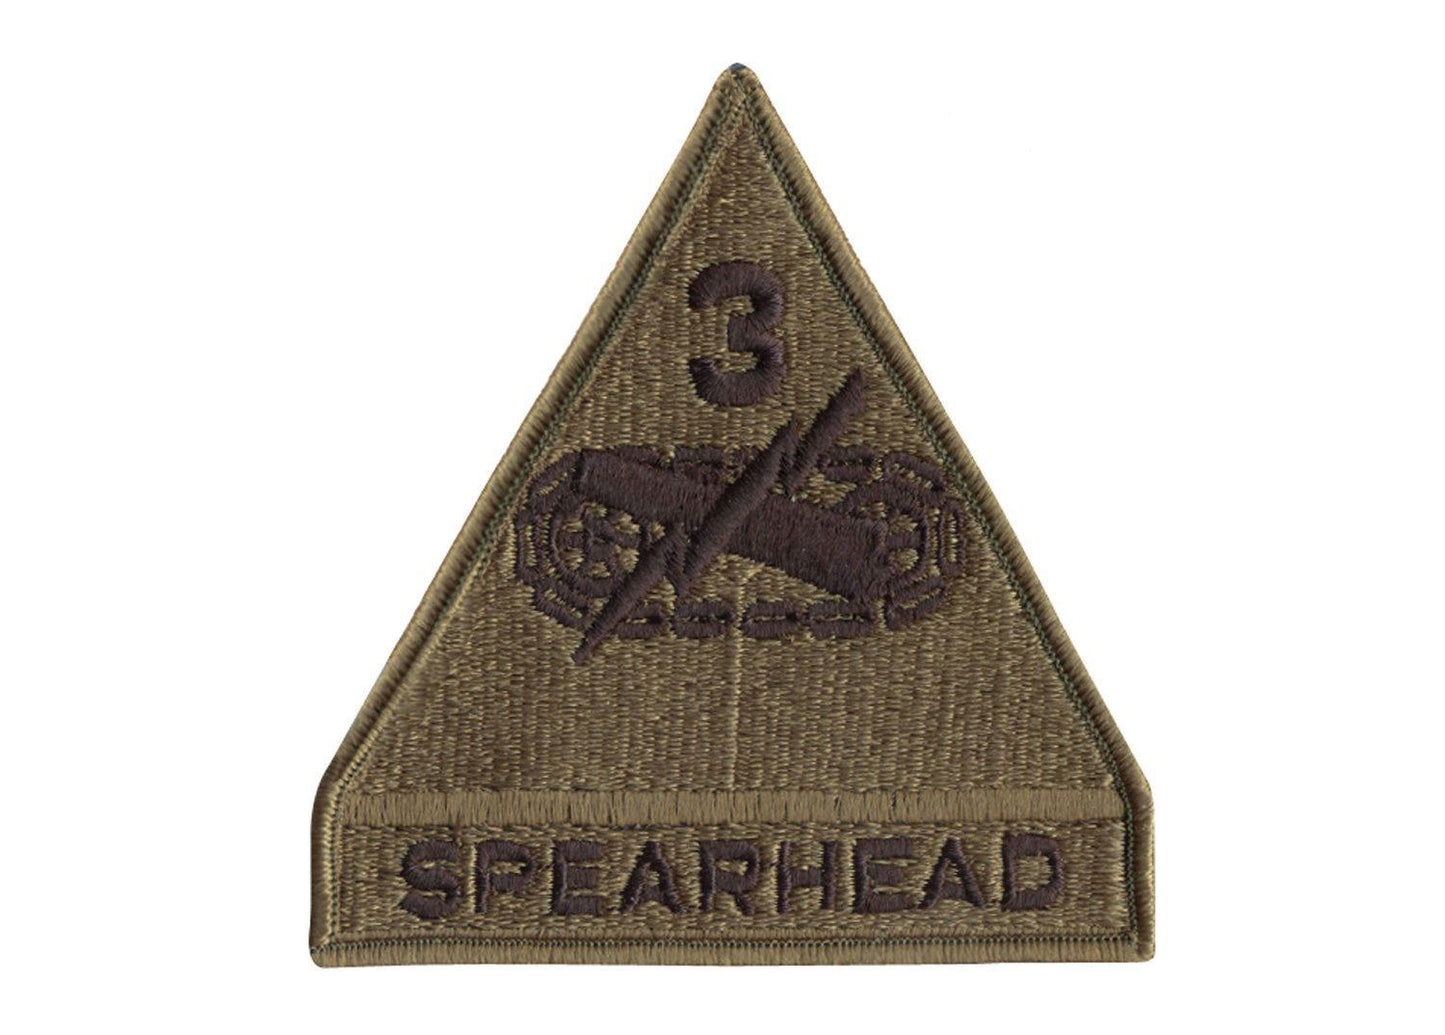 Spearhead 3rd Armored Patch (10 per pack)